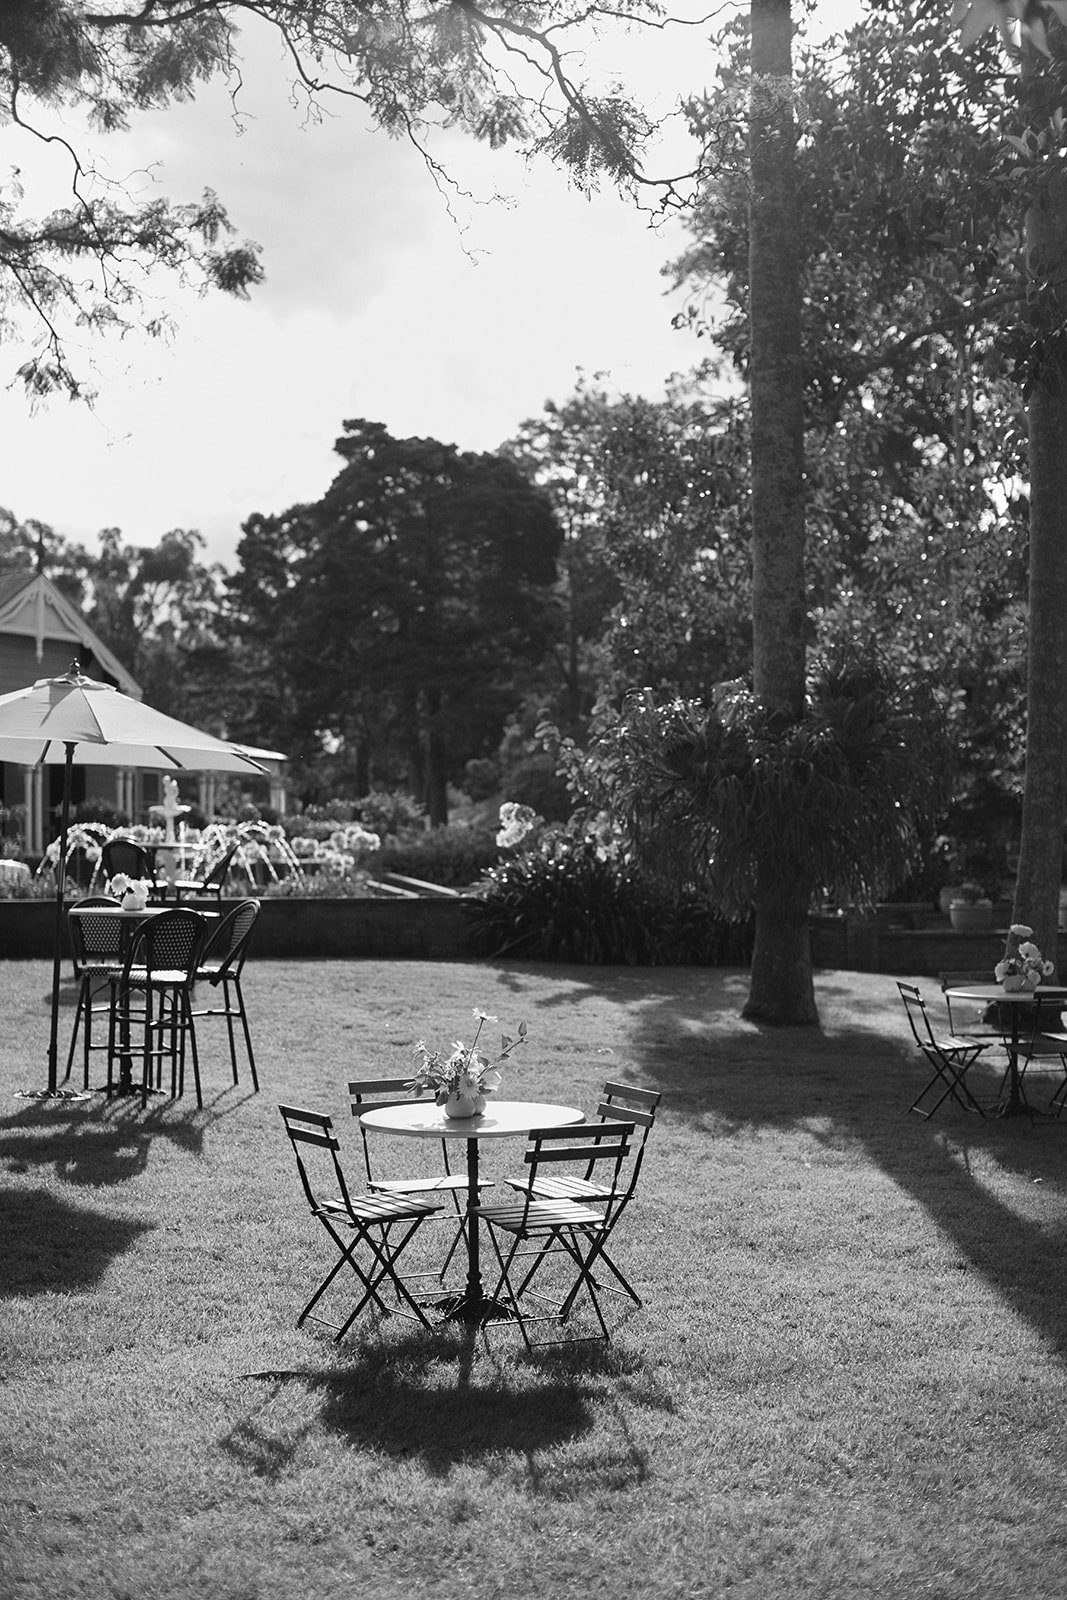 Outdoor garden party with chairs and umbrellas